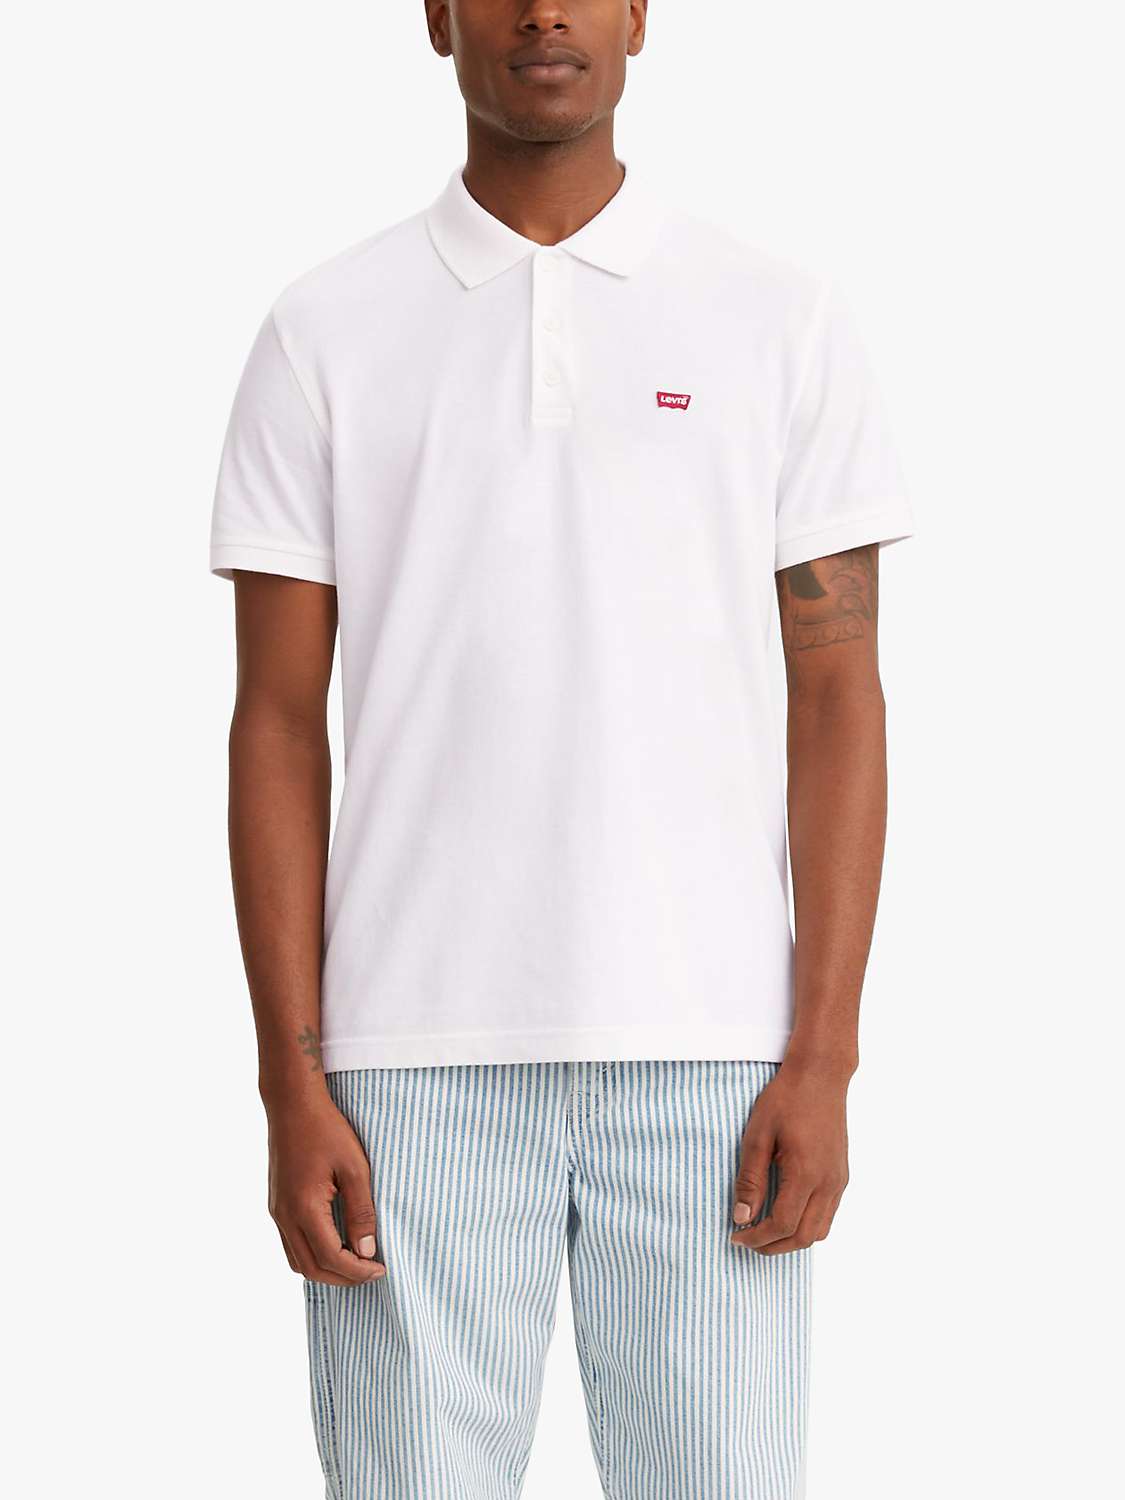 Buy Levi's Short Sleeve Polo Top Online at johnlewis.com